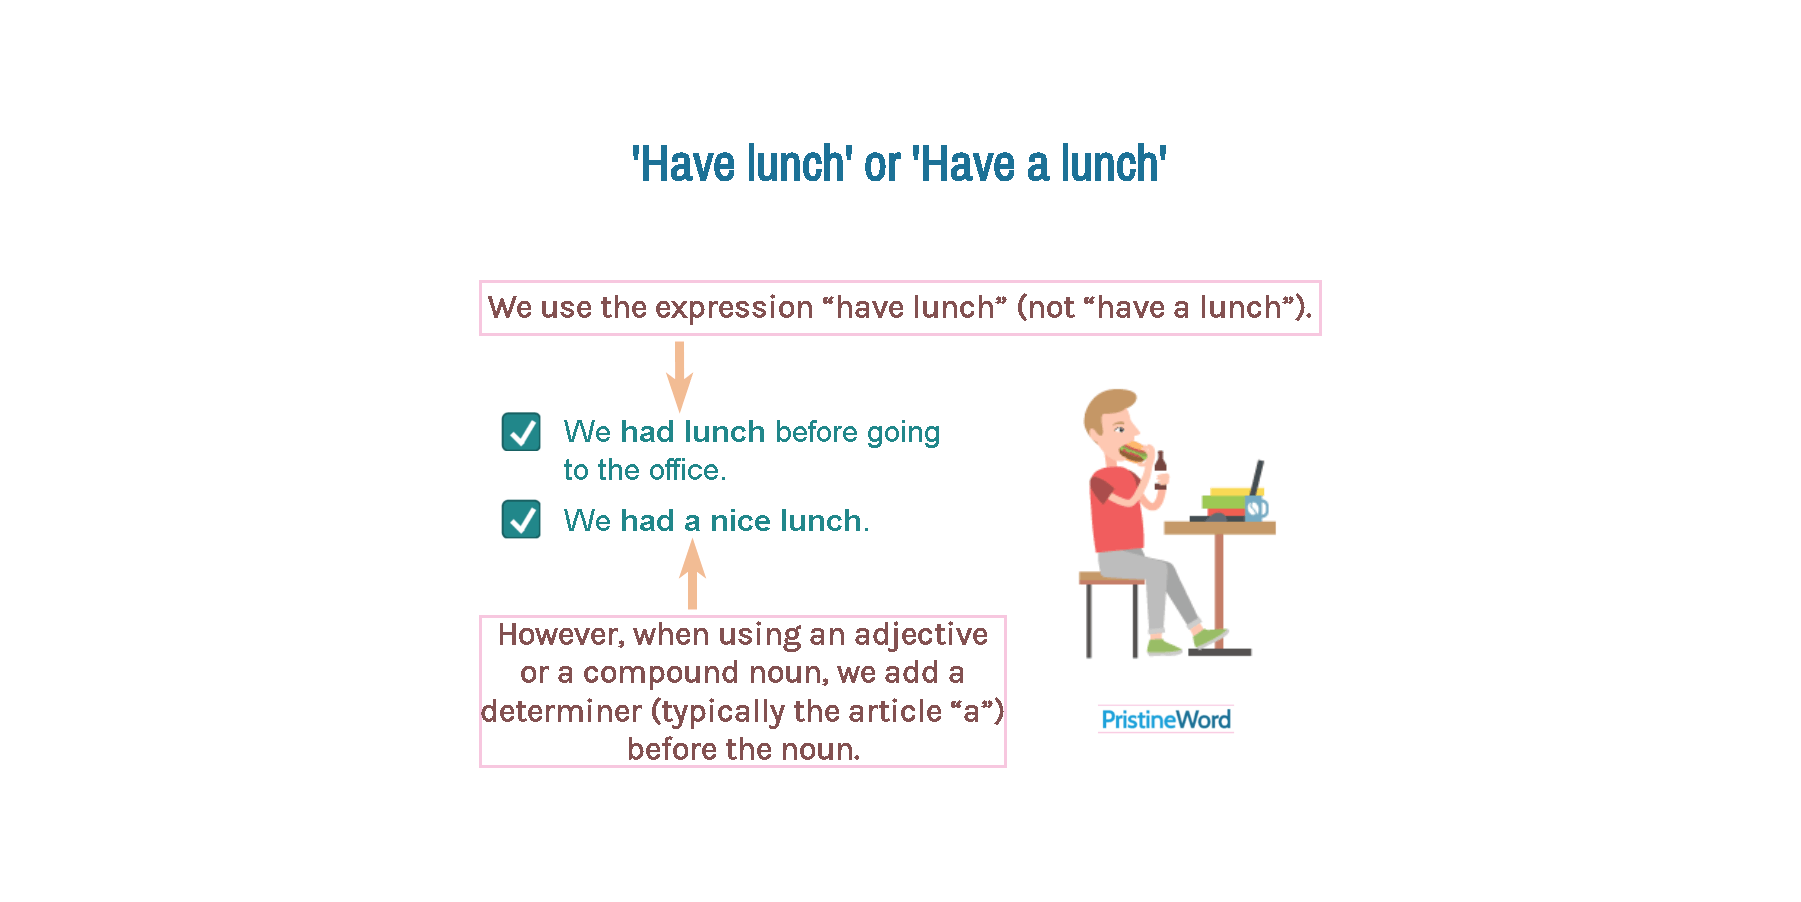 'Have lunch' or 'Have a lunch'?